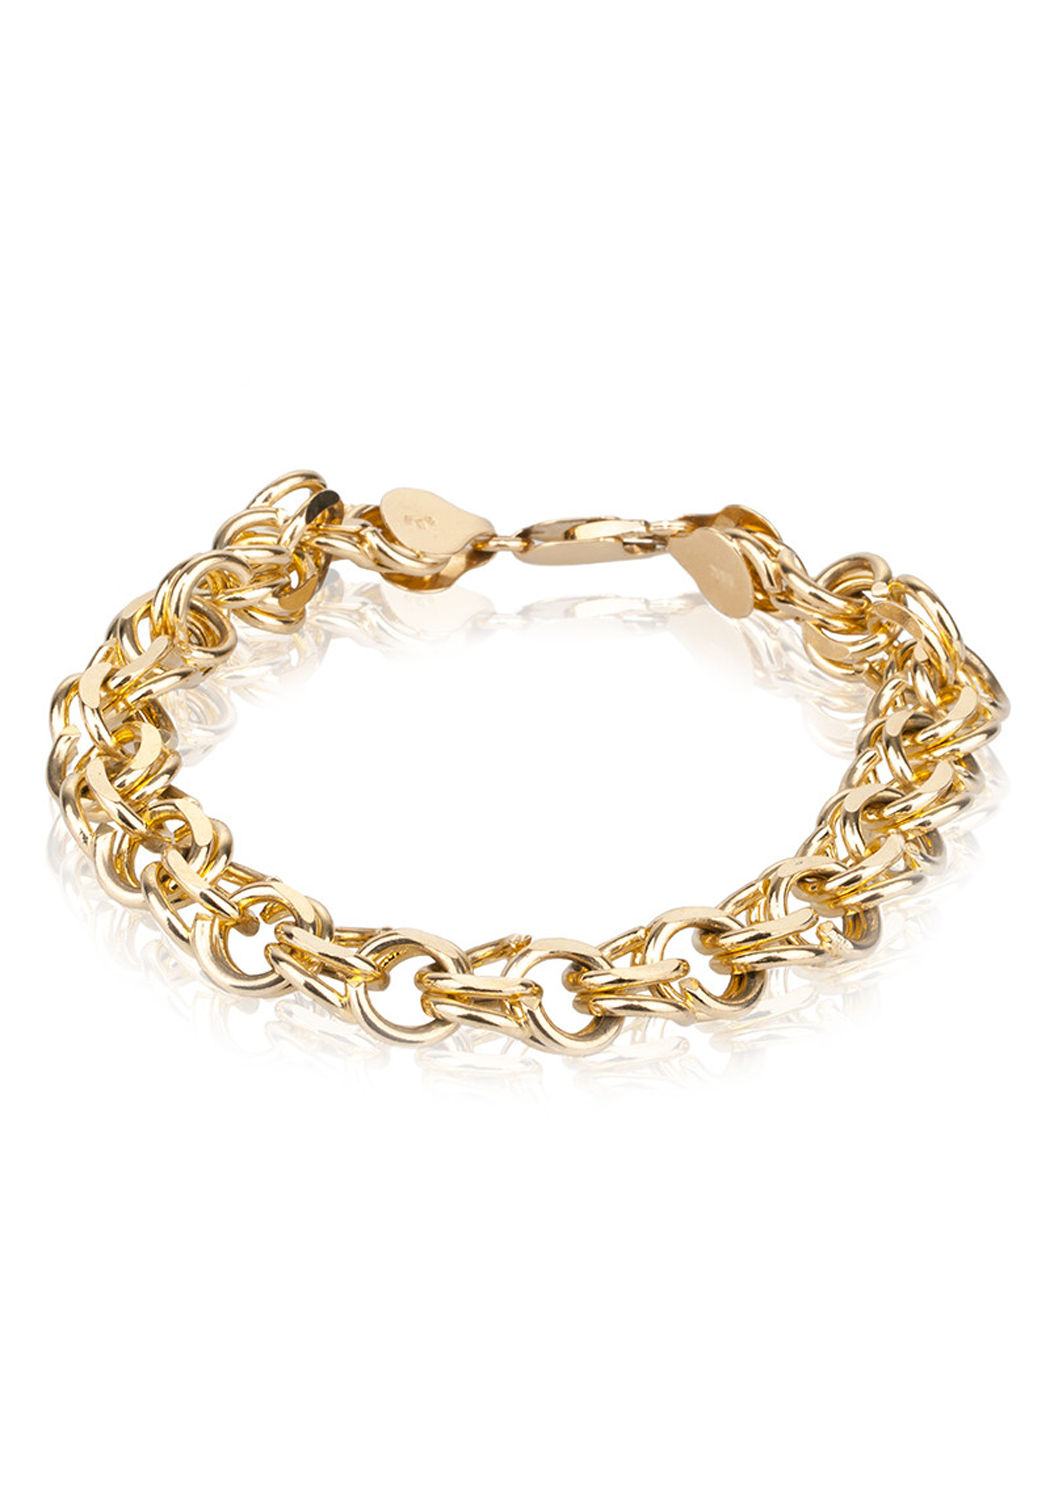 Lee Cooper women's bracelet with double chain and heart tassels |  TrendyElements